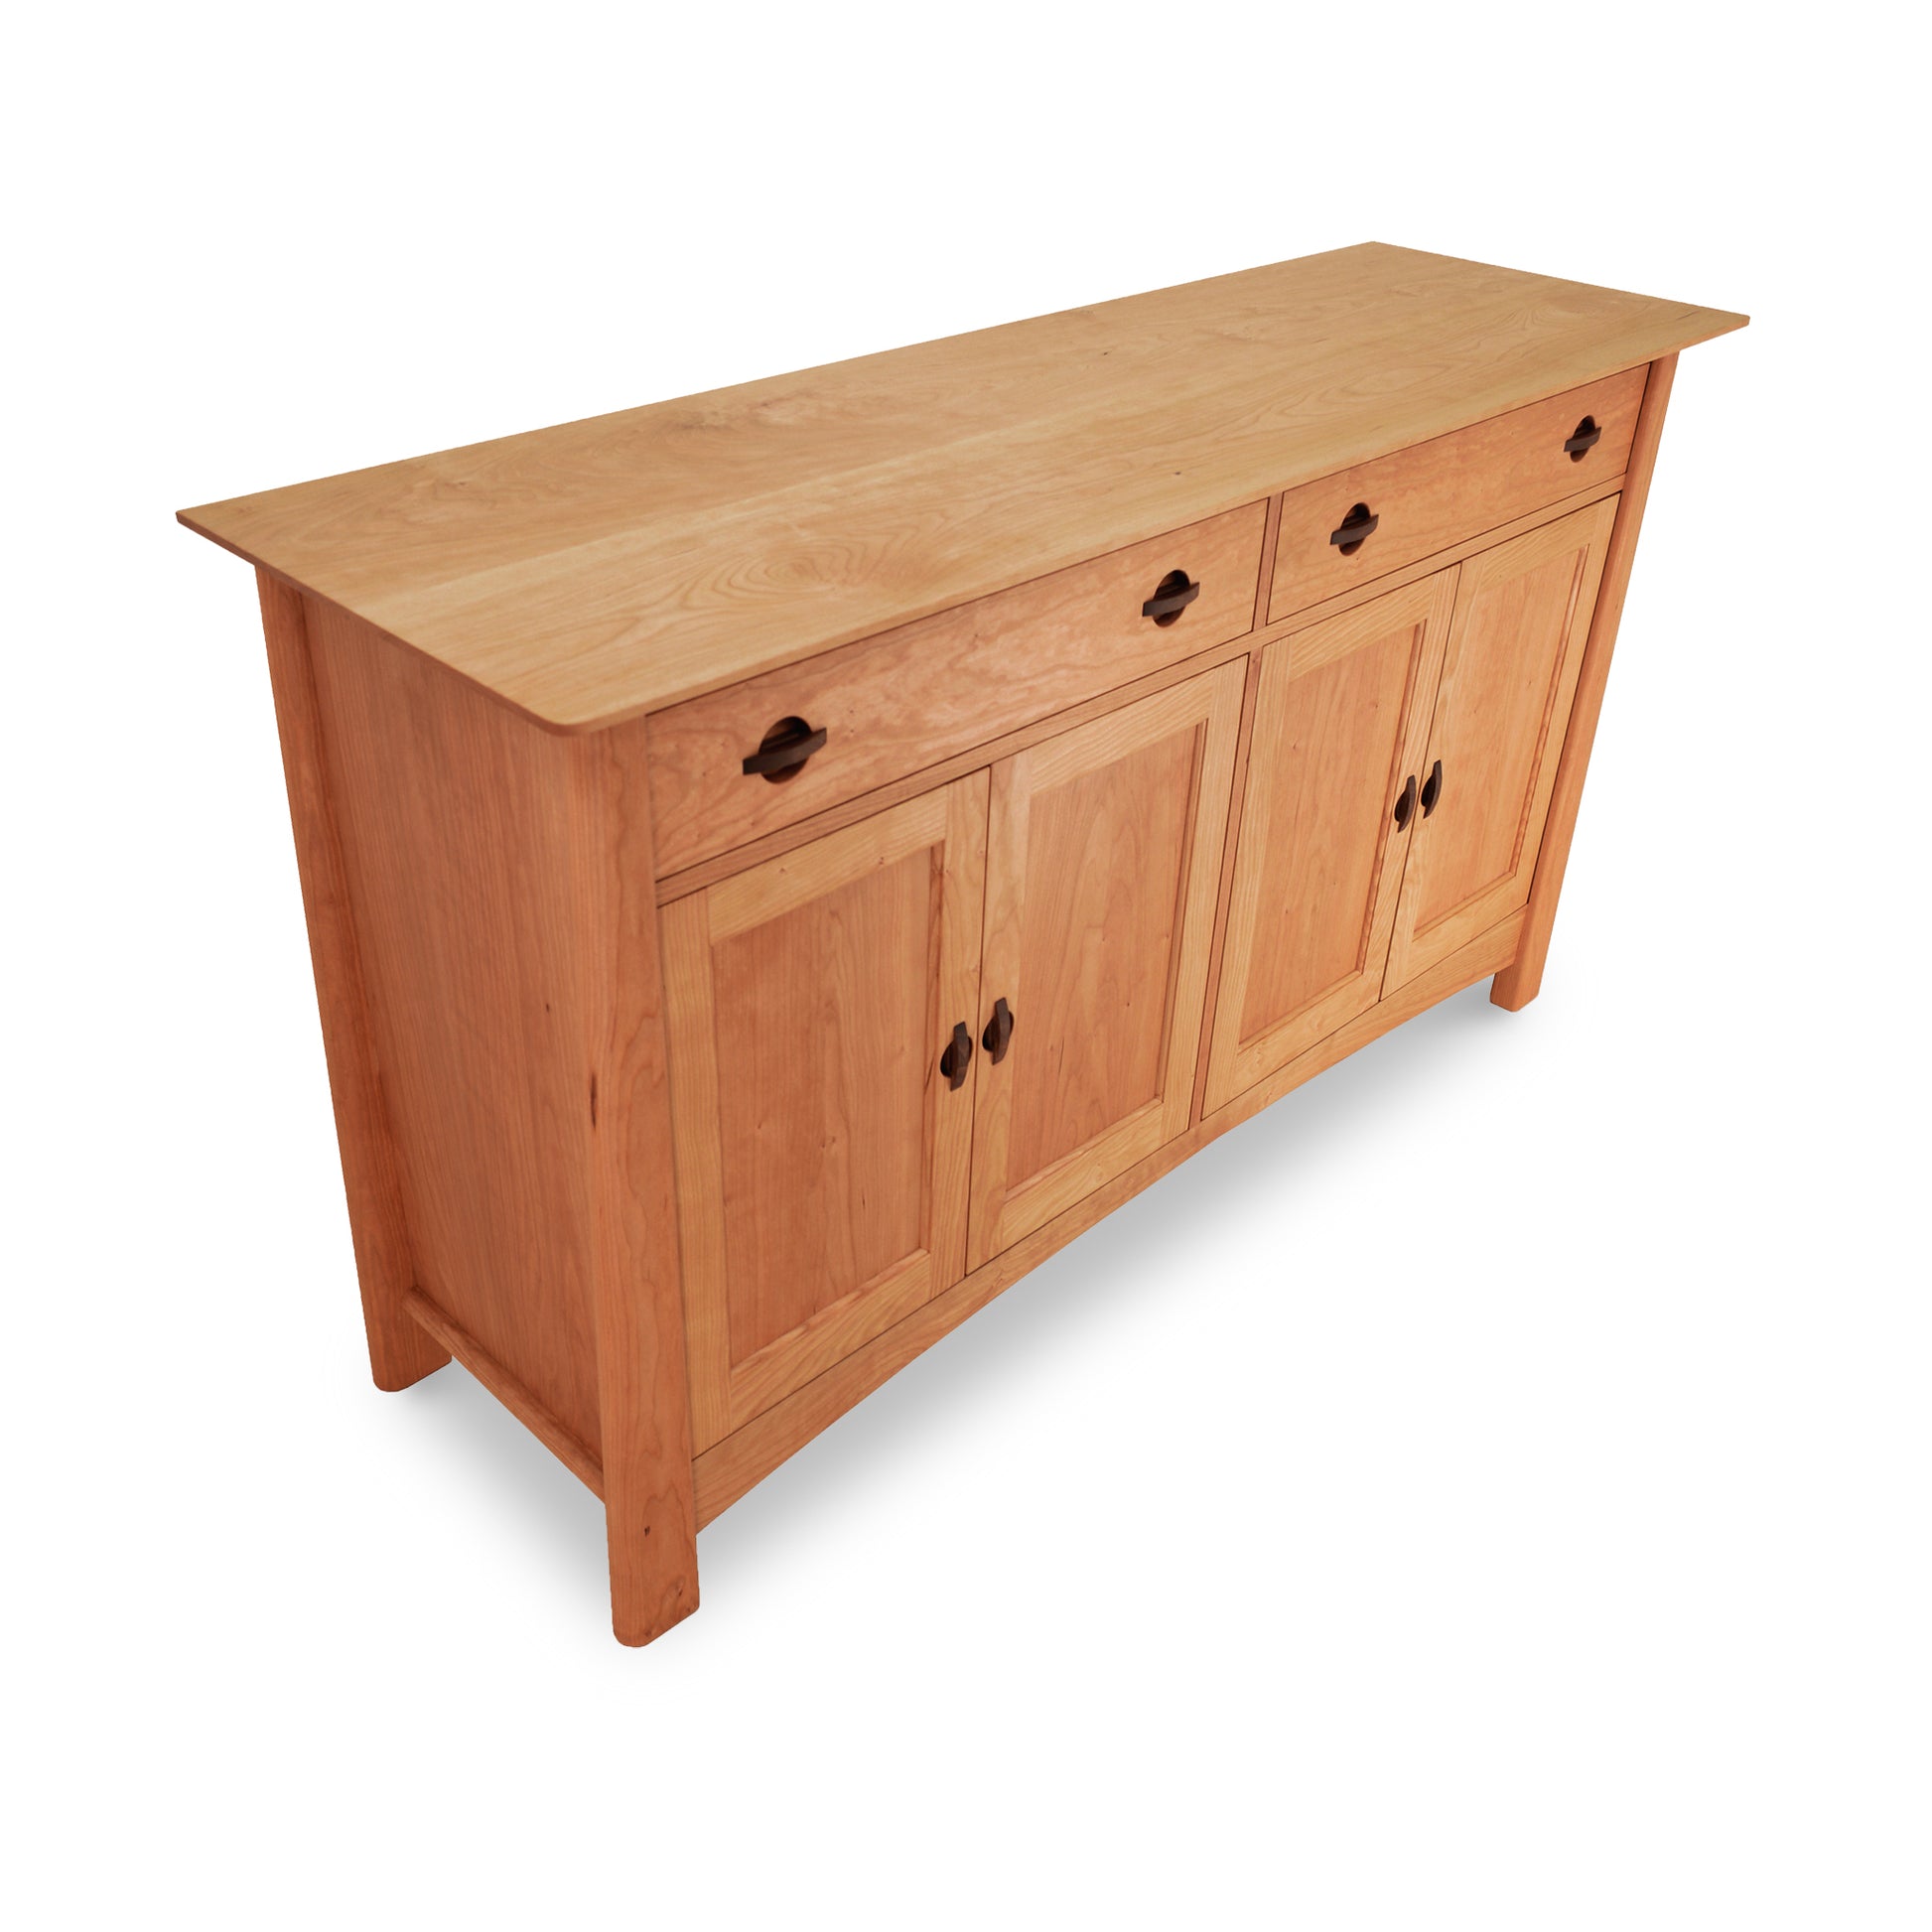 A Cherry Moon Large Sideboard by Maple Corner Woodworks, with drawers and doors, perfect for a high-end dining room.